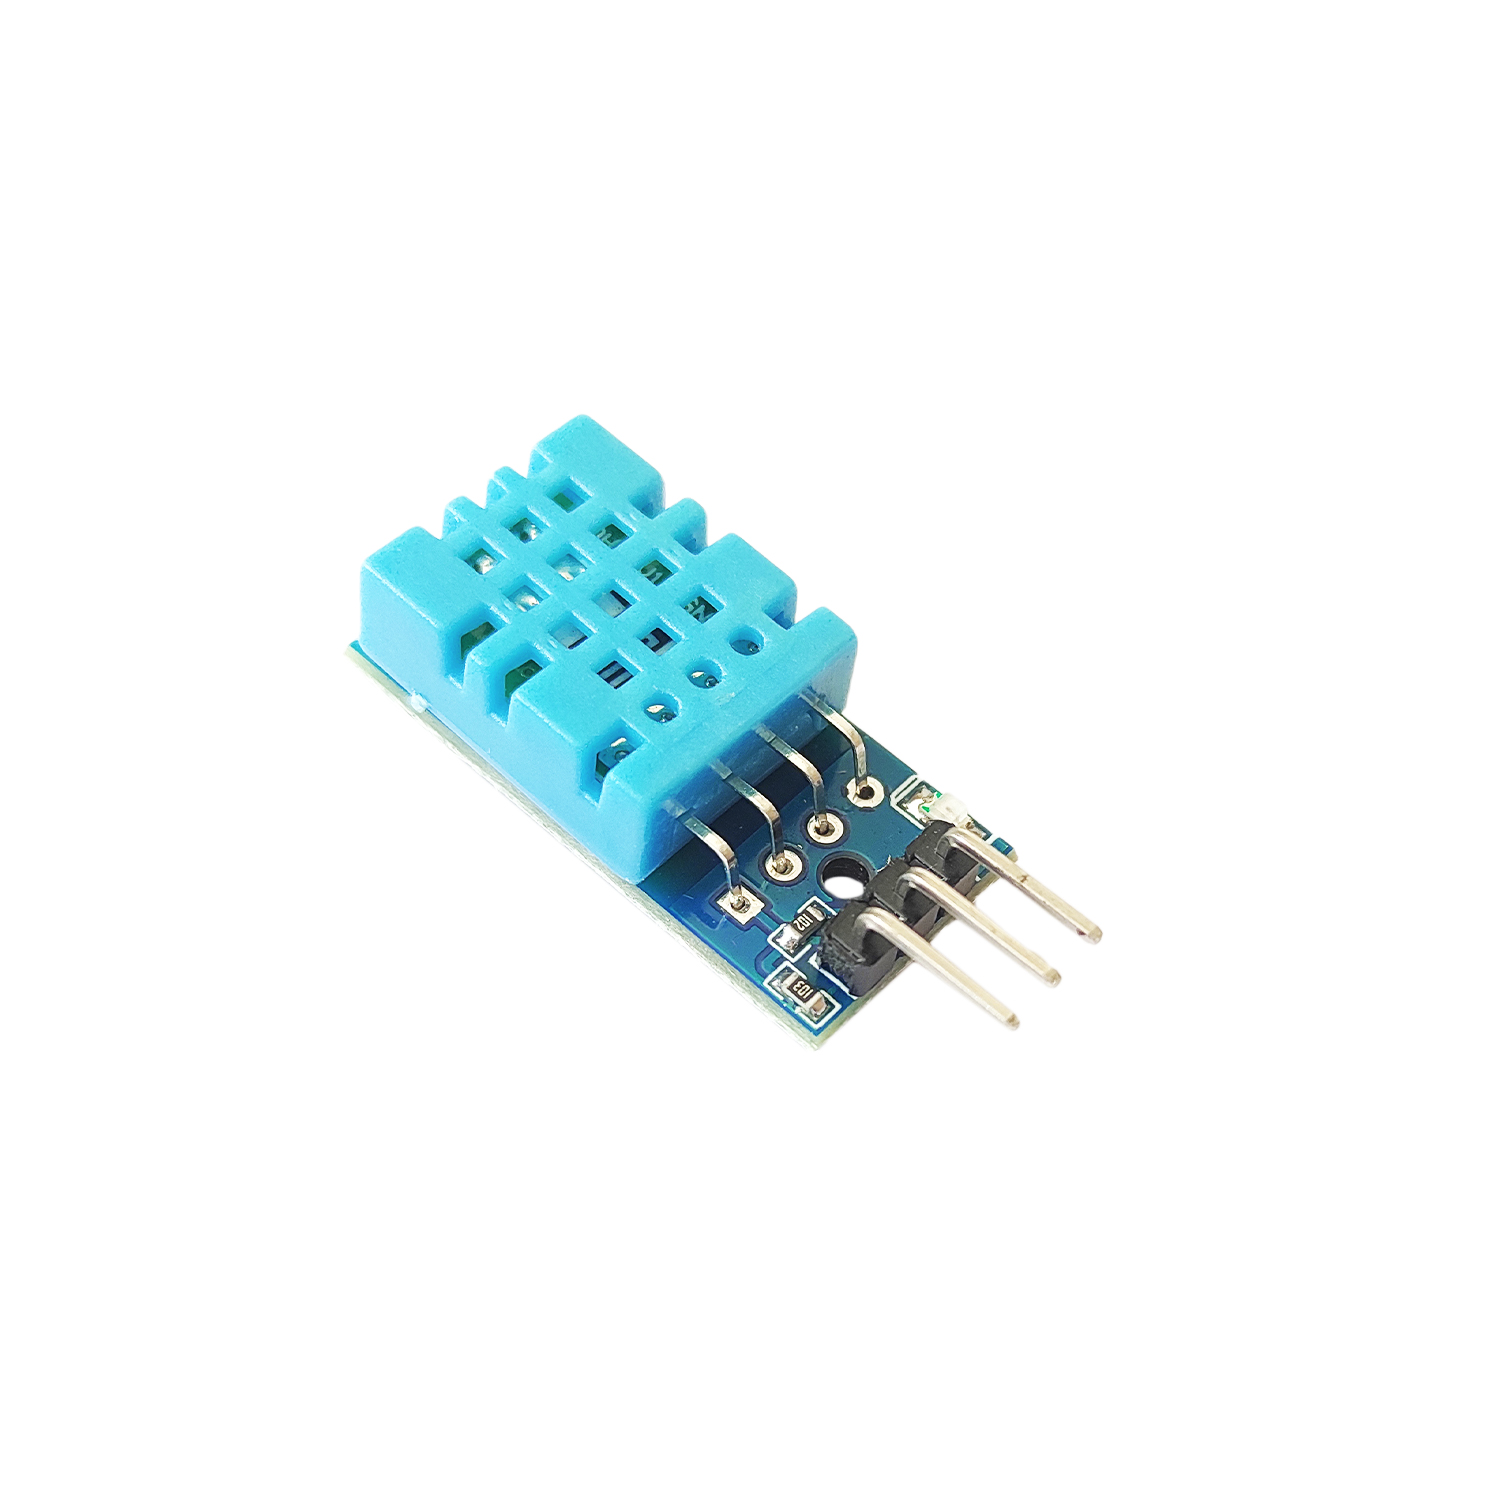 Dht11 Humidity And Temperature Sensor With Pcb Available At Rajguru Electronics 0251